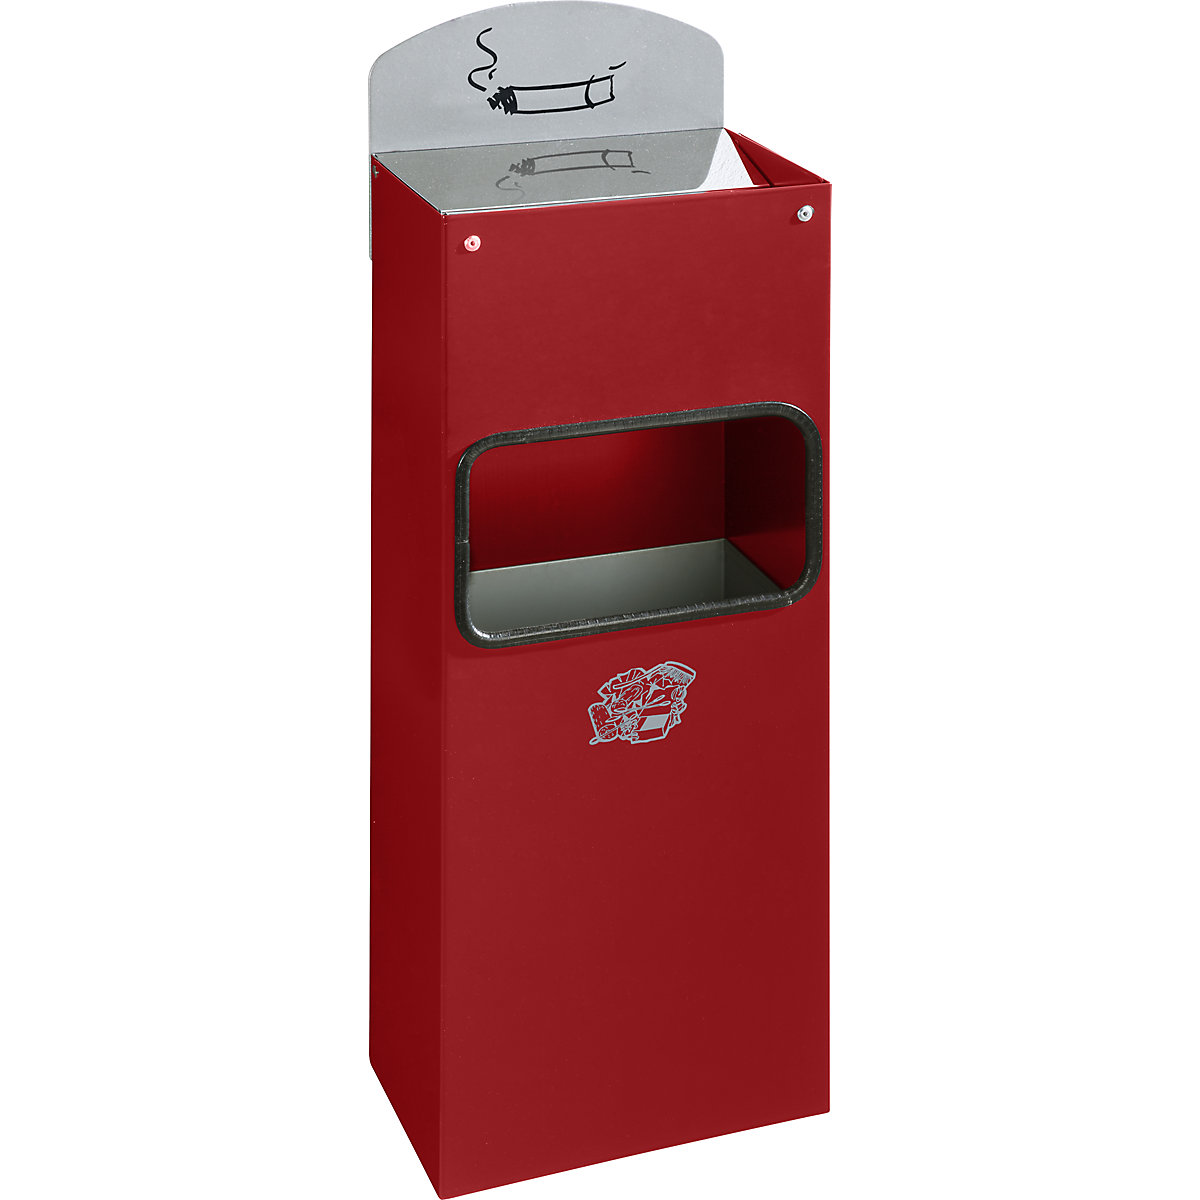 VAR – Combination wall ashtray with waste disposal, HxWxD 505 x 200 x 125 mm, sheet steel, flame red